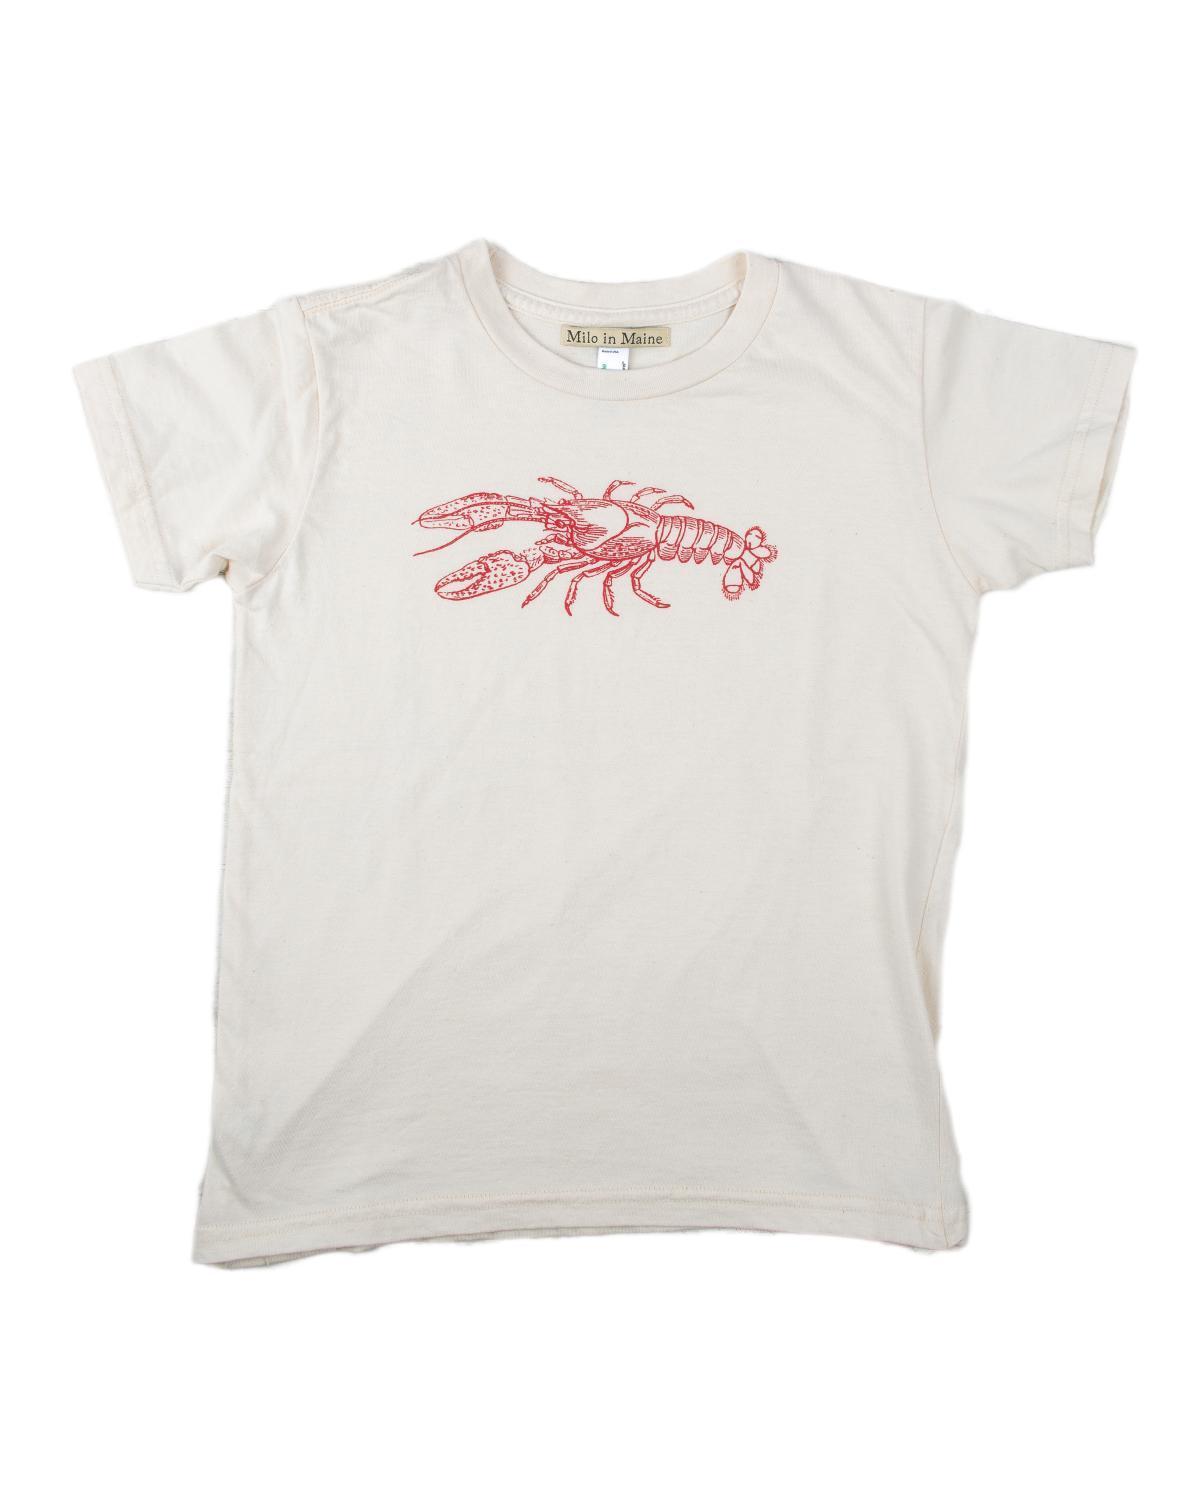 Little milo in maine baby boy 3-6 S/S Baby Lobster Tee in Natural + Red